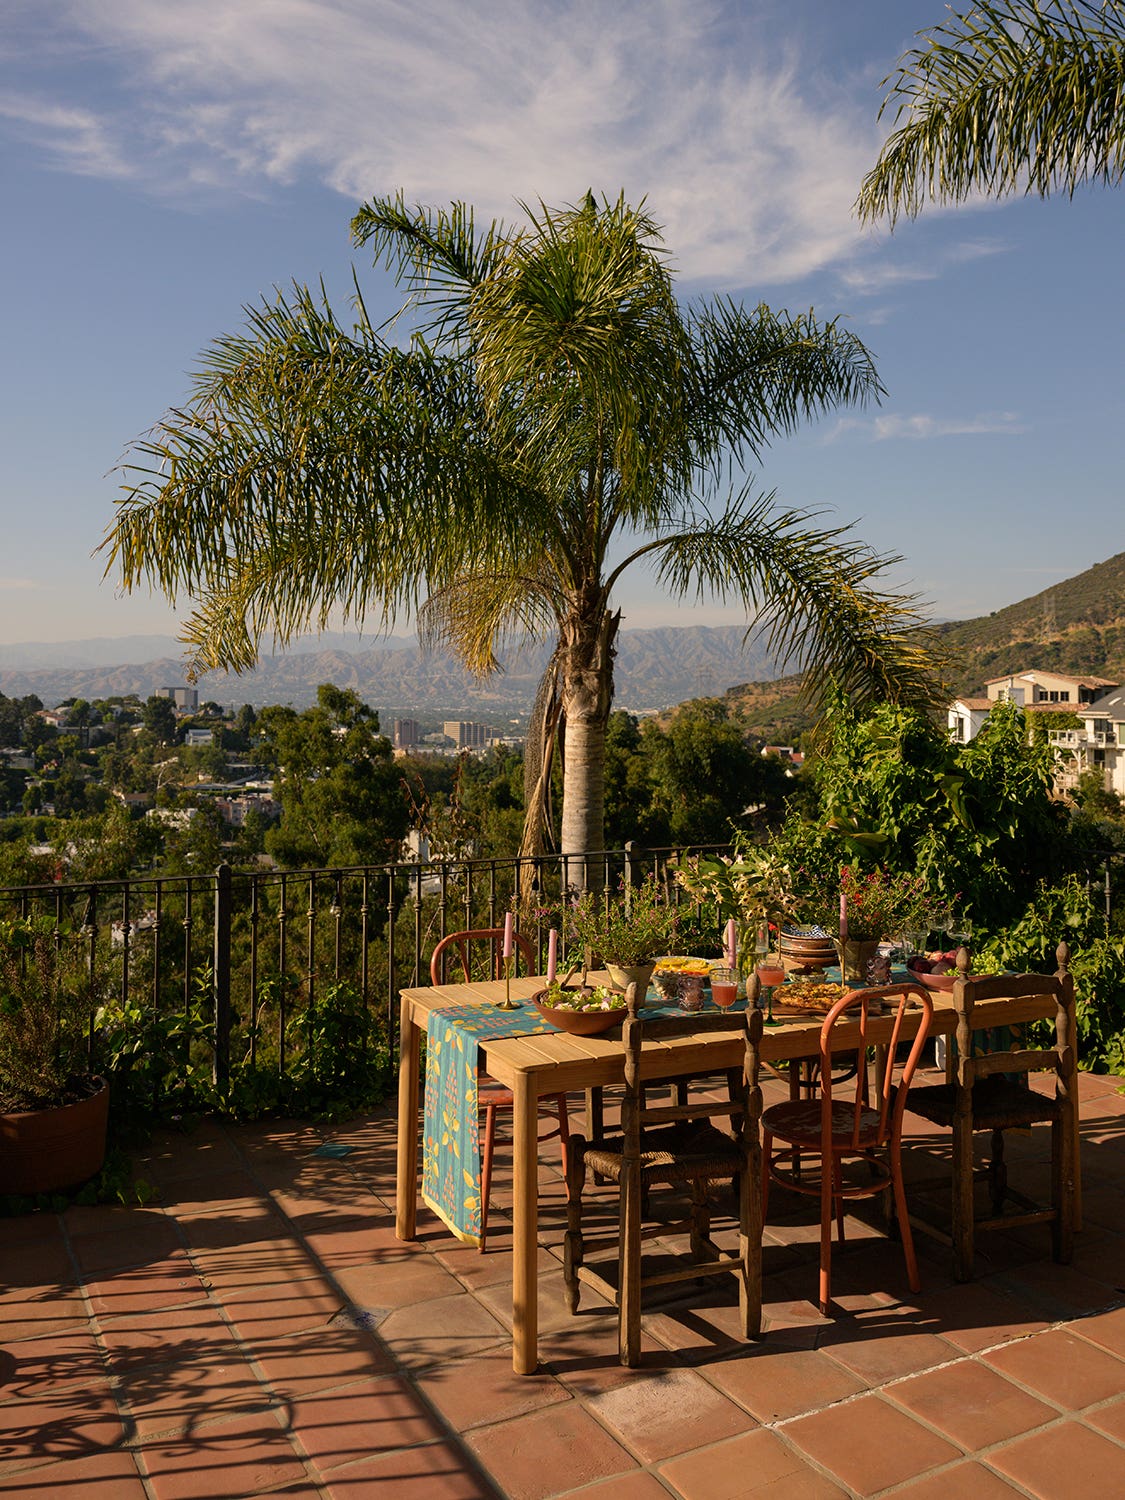 Table on a patio overlooking Los Angeles and palm trees